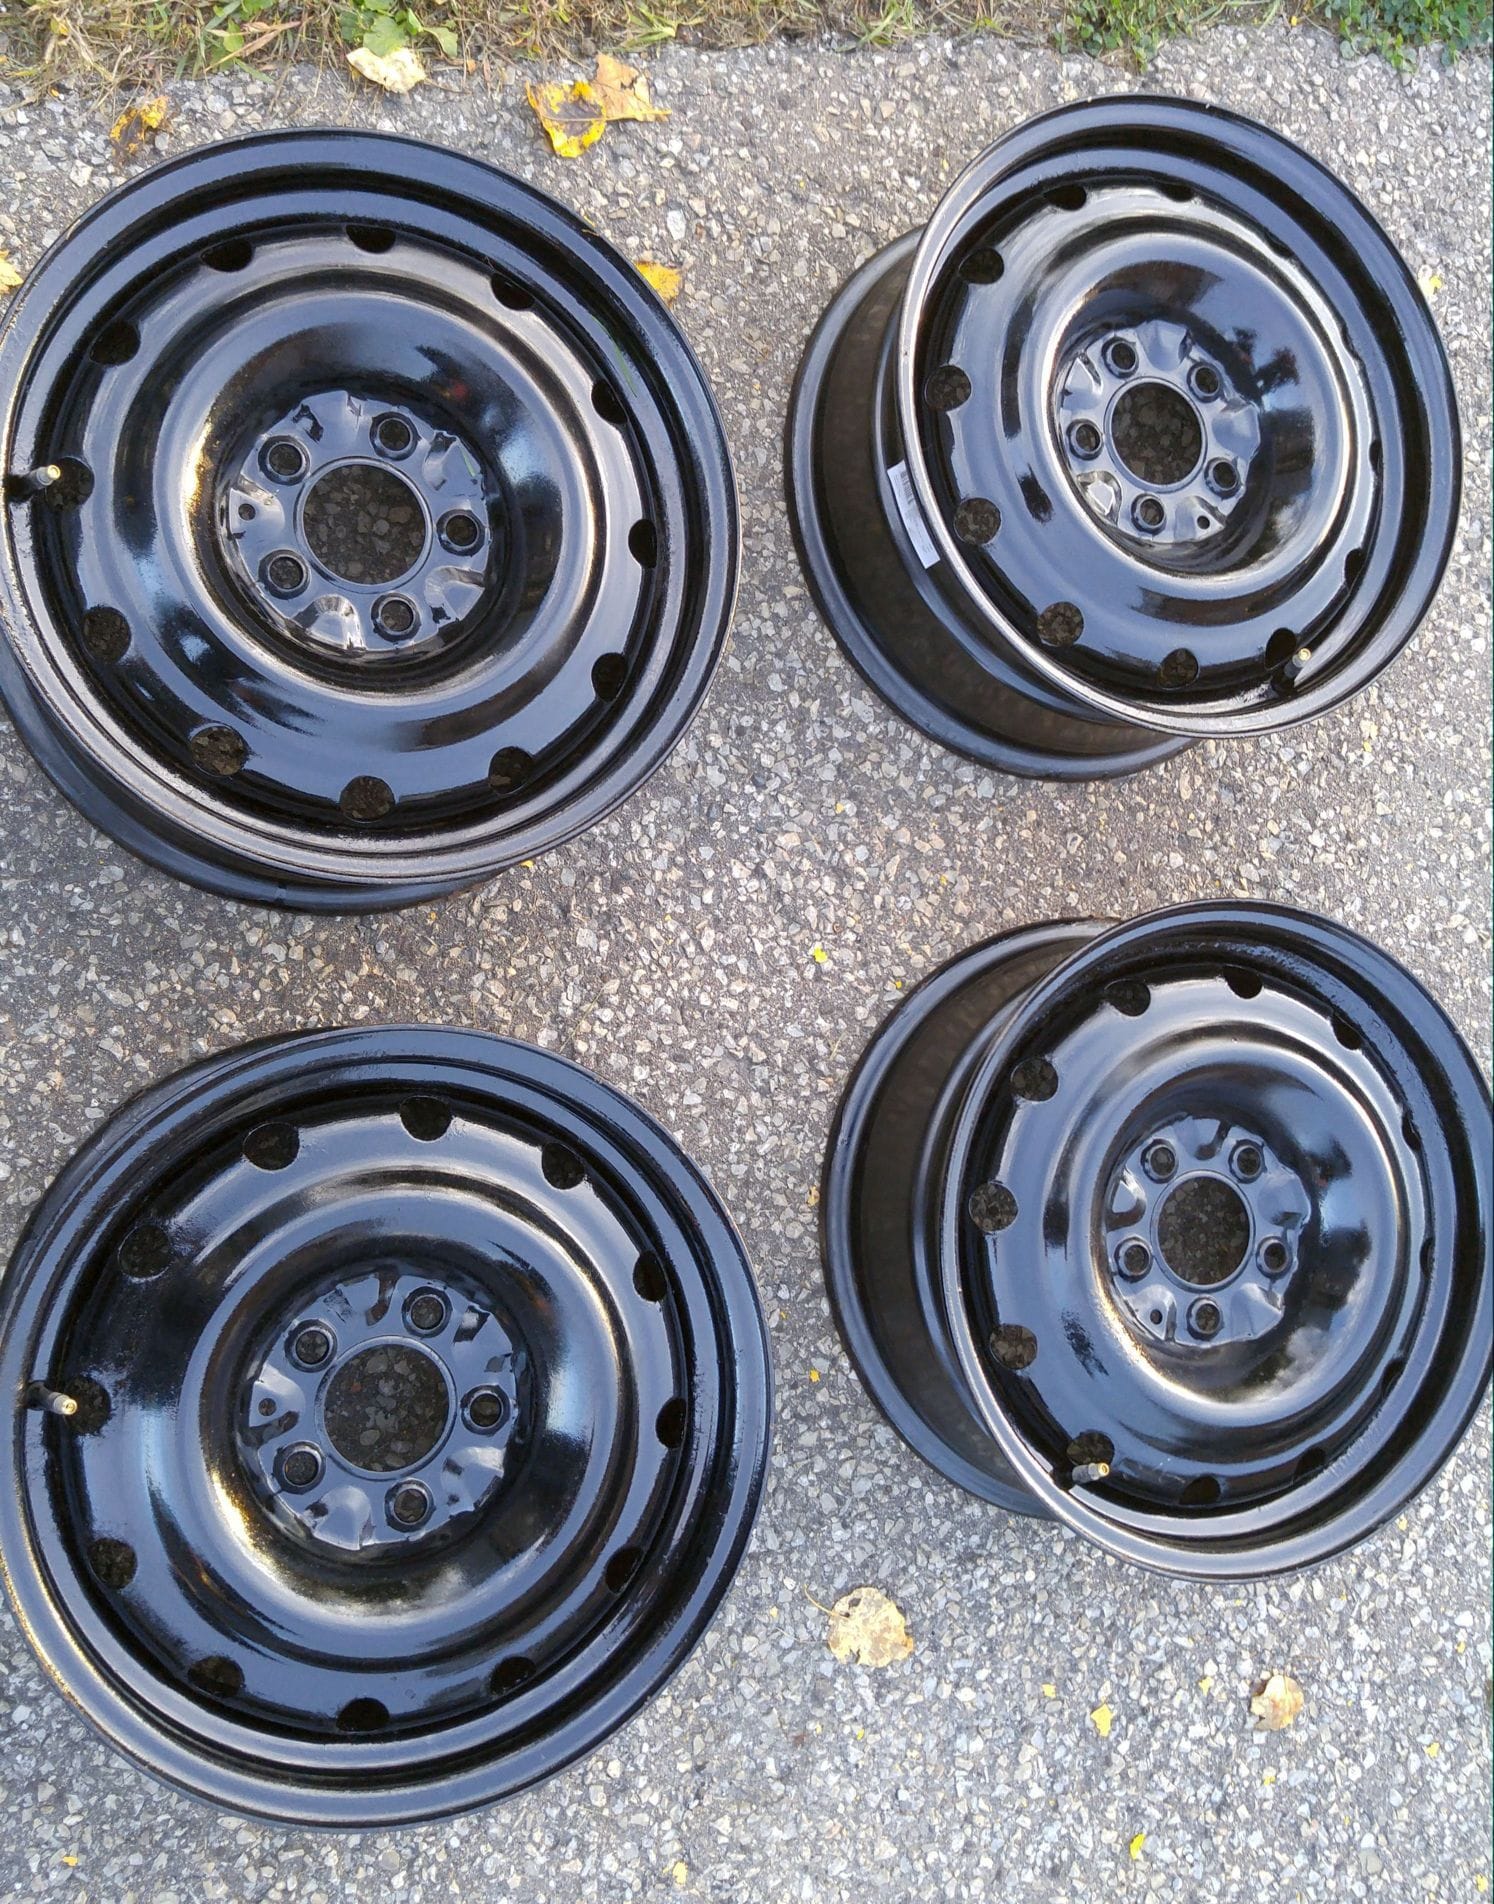 Wheels and Tires/Axles - SOLD: Steel Rims for Sale - 16" Diameter, 6.5" Width 5X114 - Used - 1999 to 2008 Acura TL - 2004 to 2014 Acura TSX - 2001 to 2012 Ford Escape - 2001 to 2012 Mazda Tribute - Gta Area (& North), ON L3V6H4, Canada